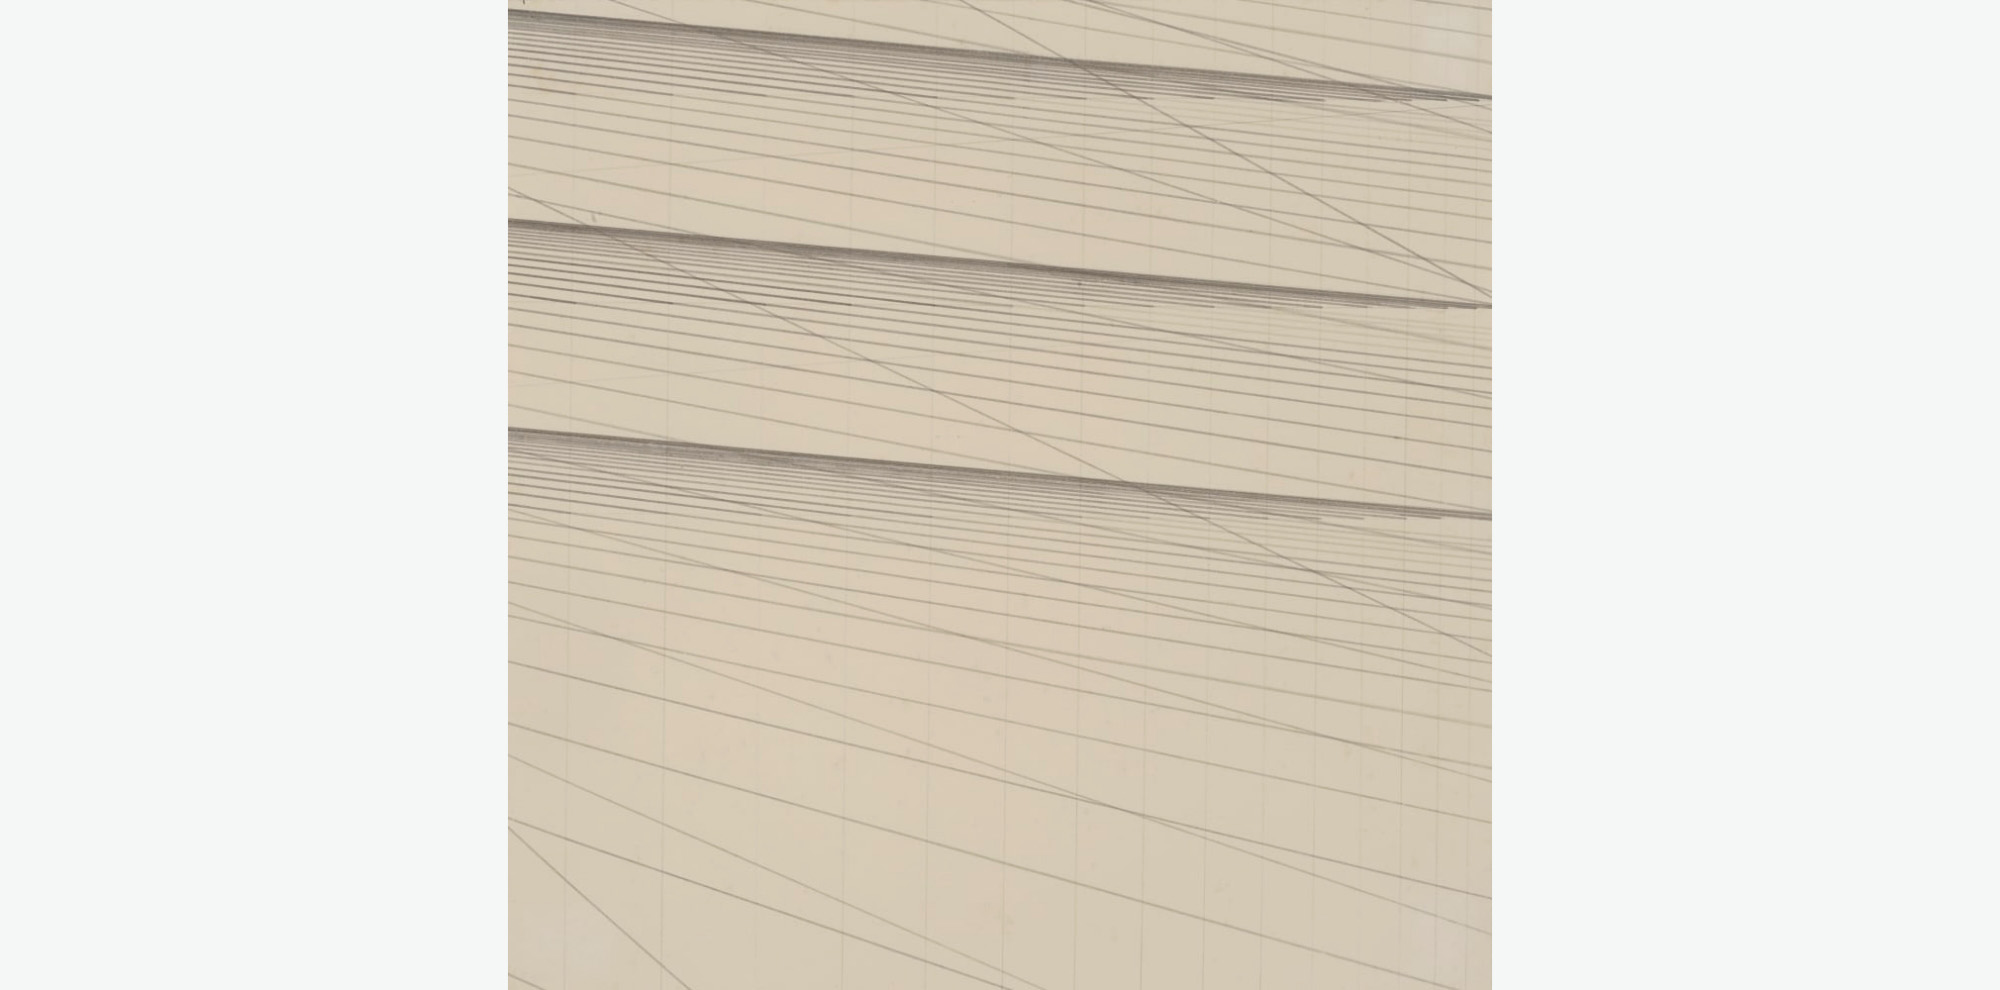 Multiple lines overlap each other at various angles on tan paper.